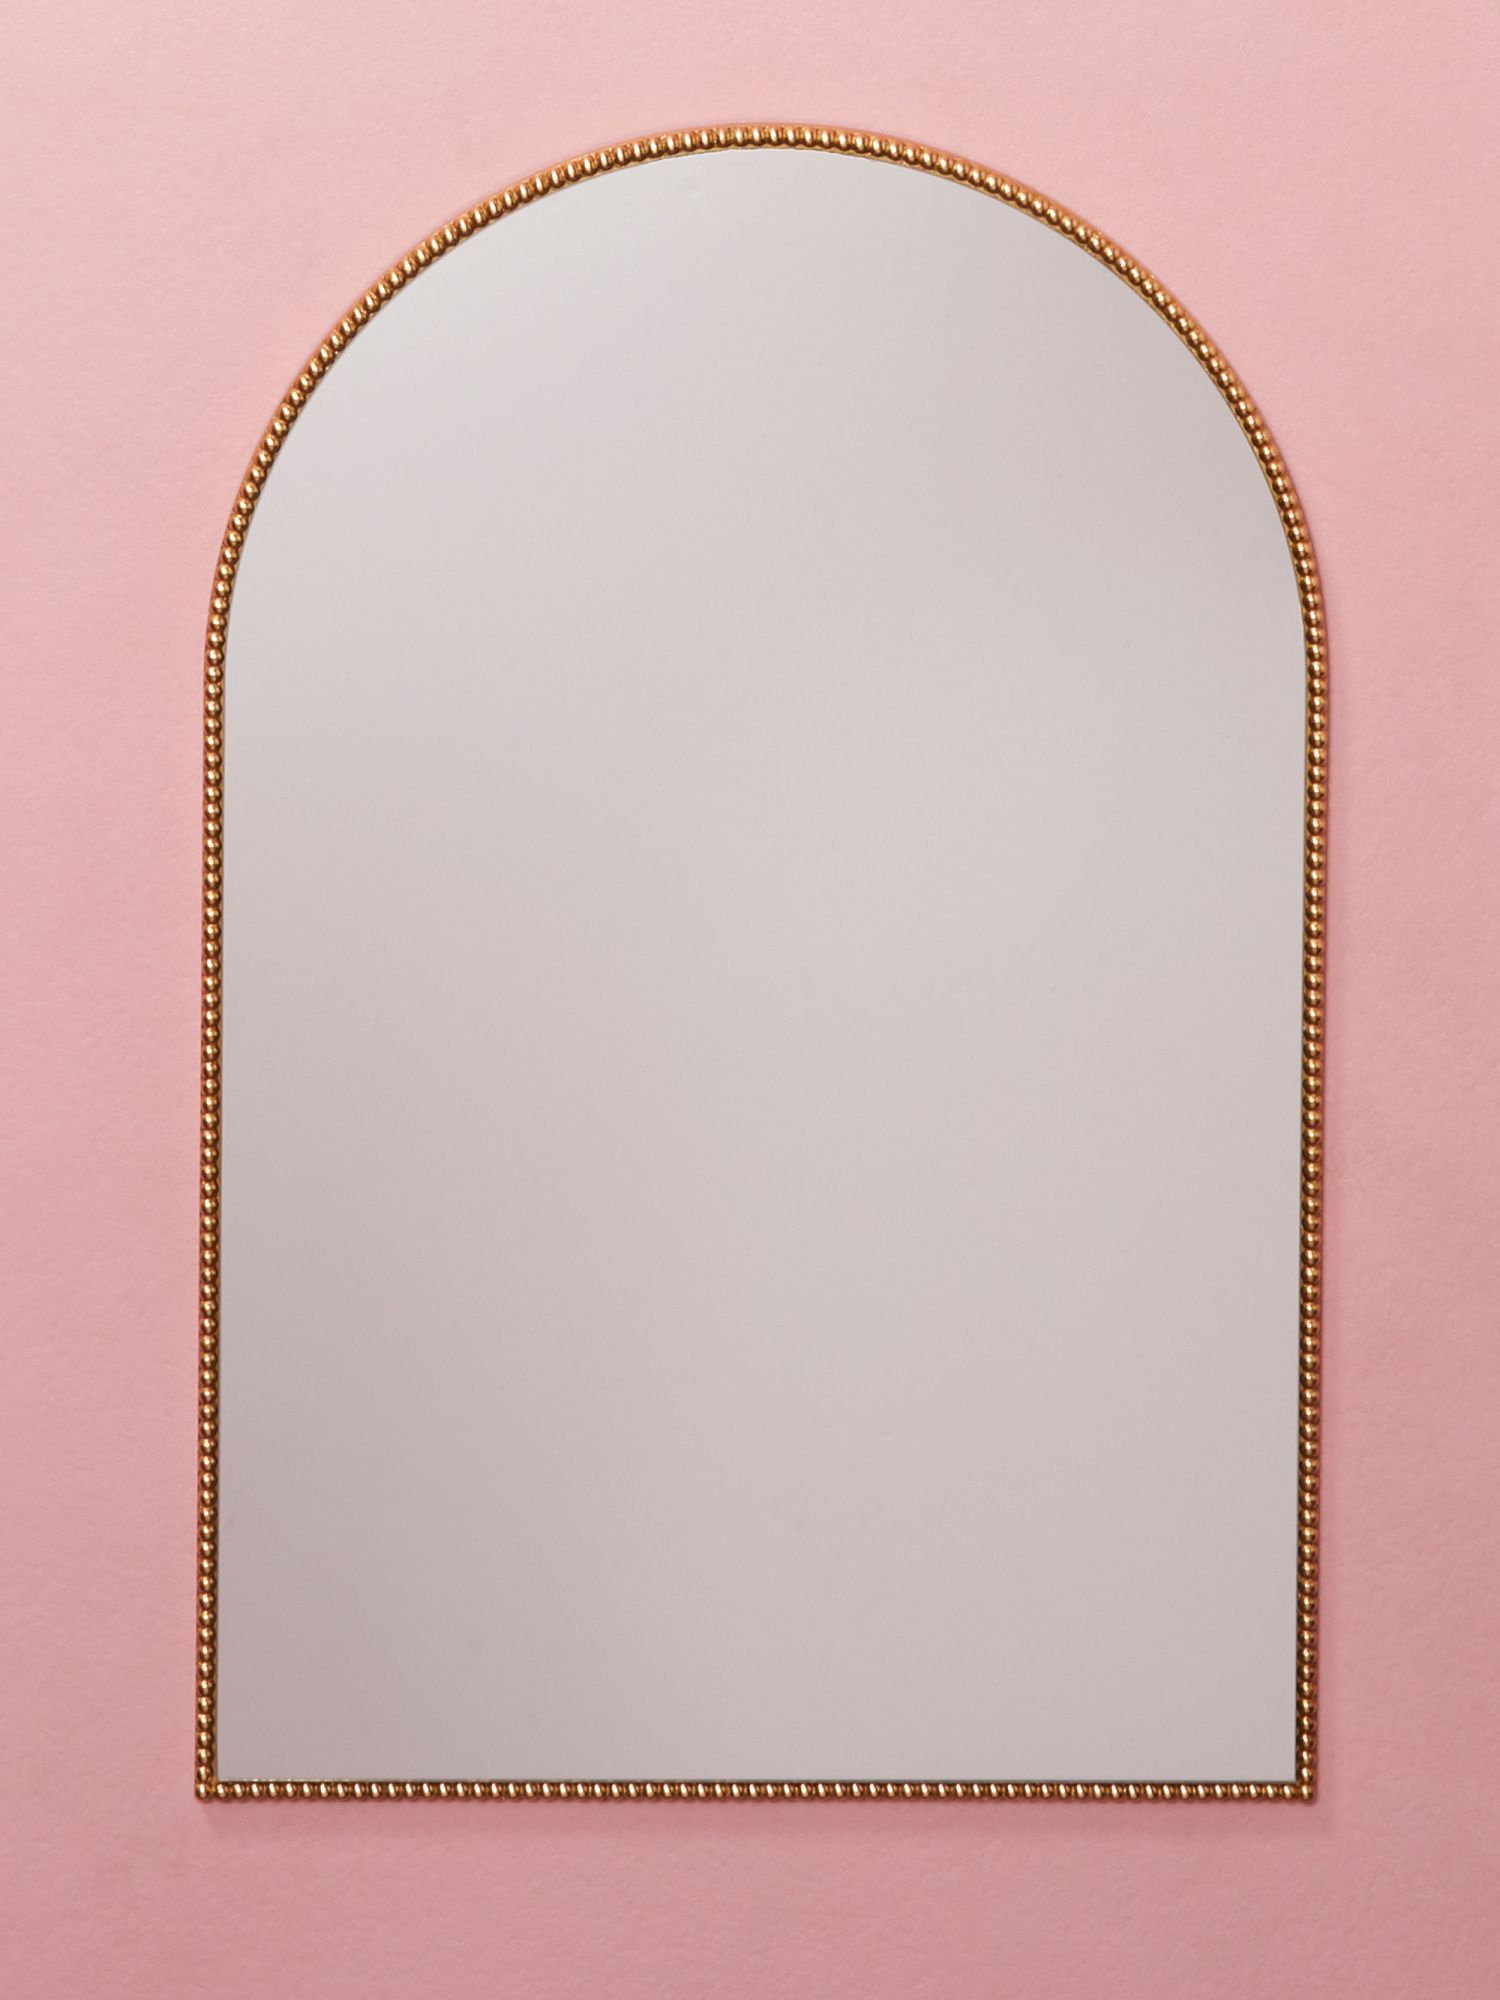 24x36 Arch Top Wall Mirror In Foiled Frame | Living Room | HomeGoods | HomeGoods